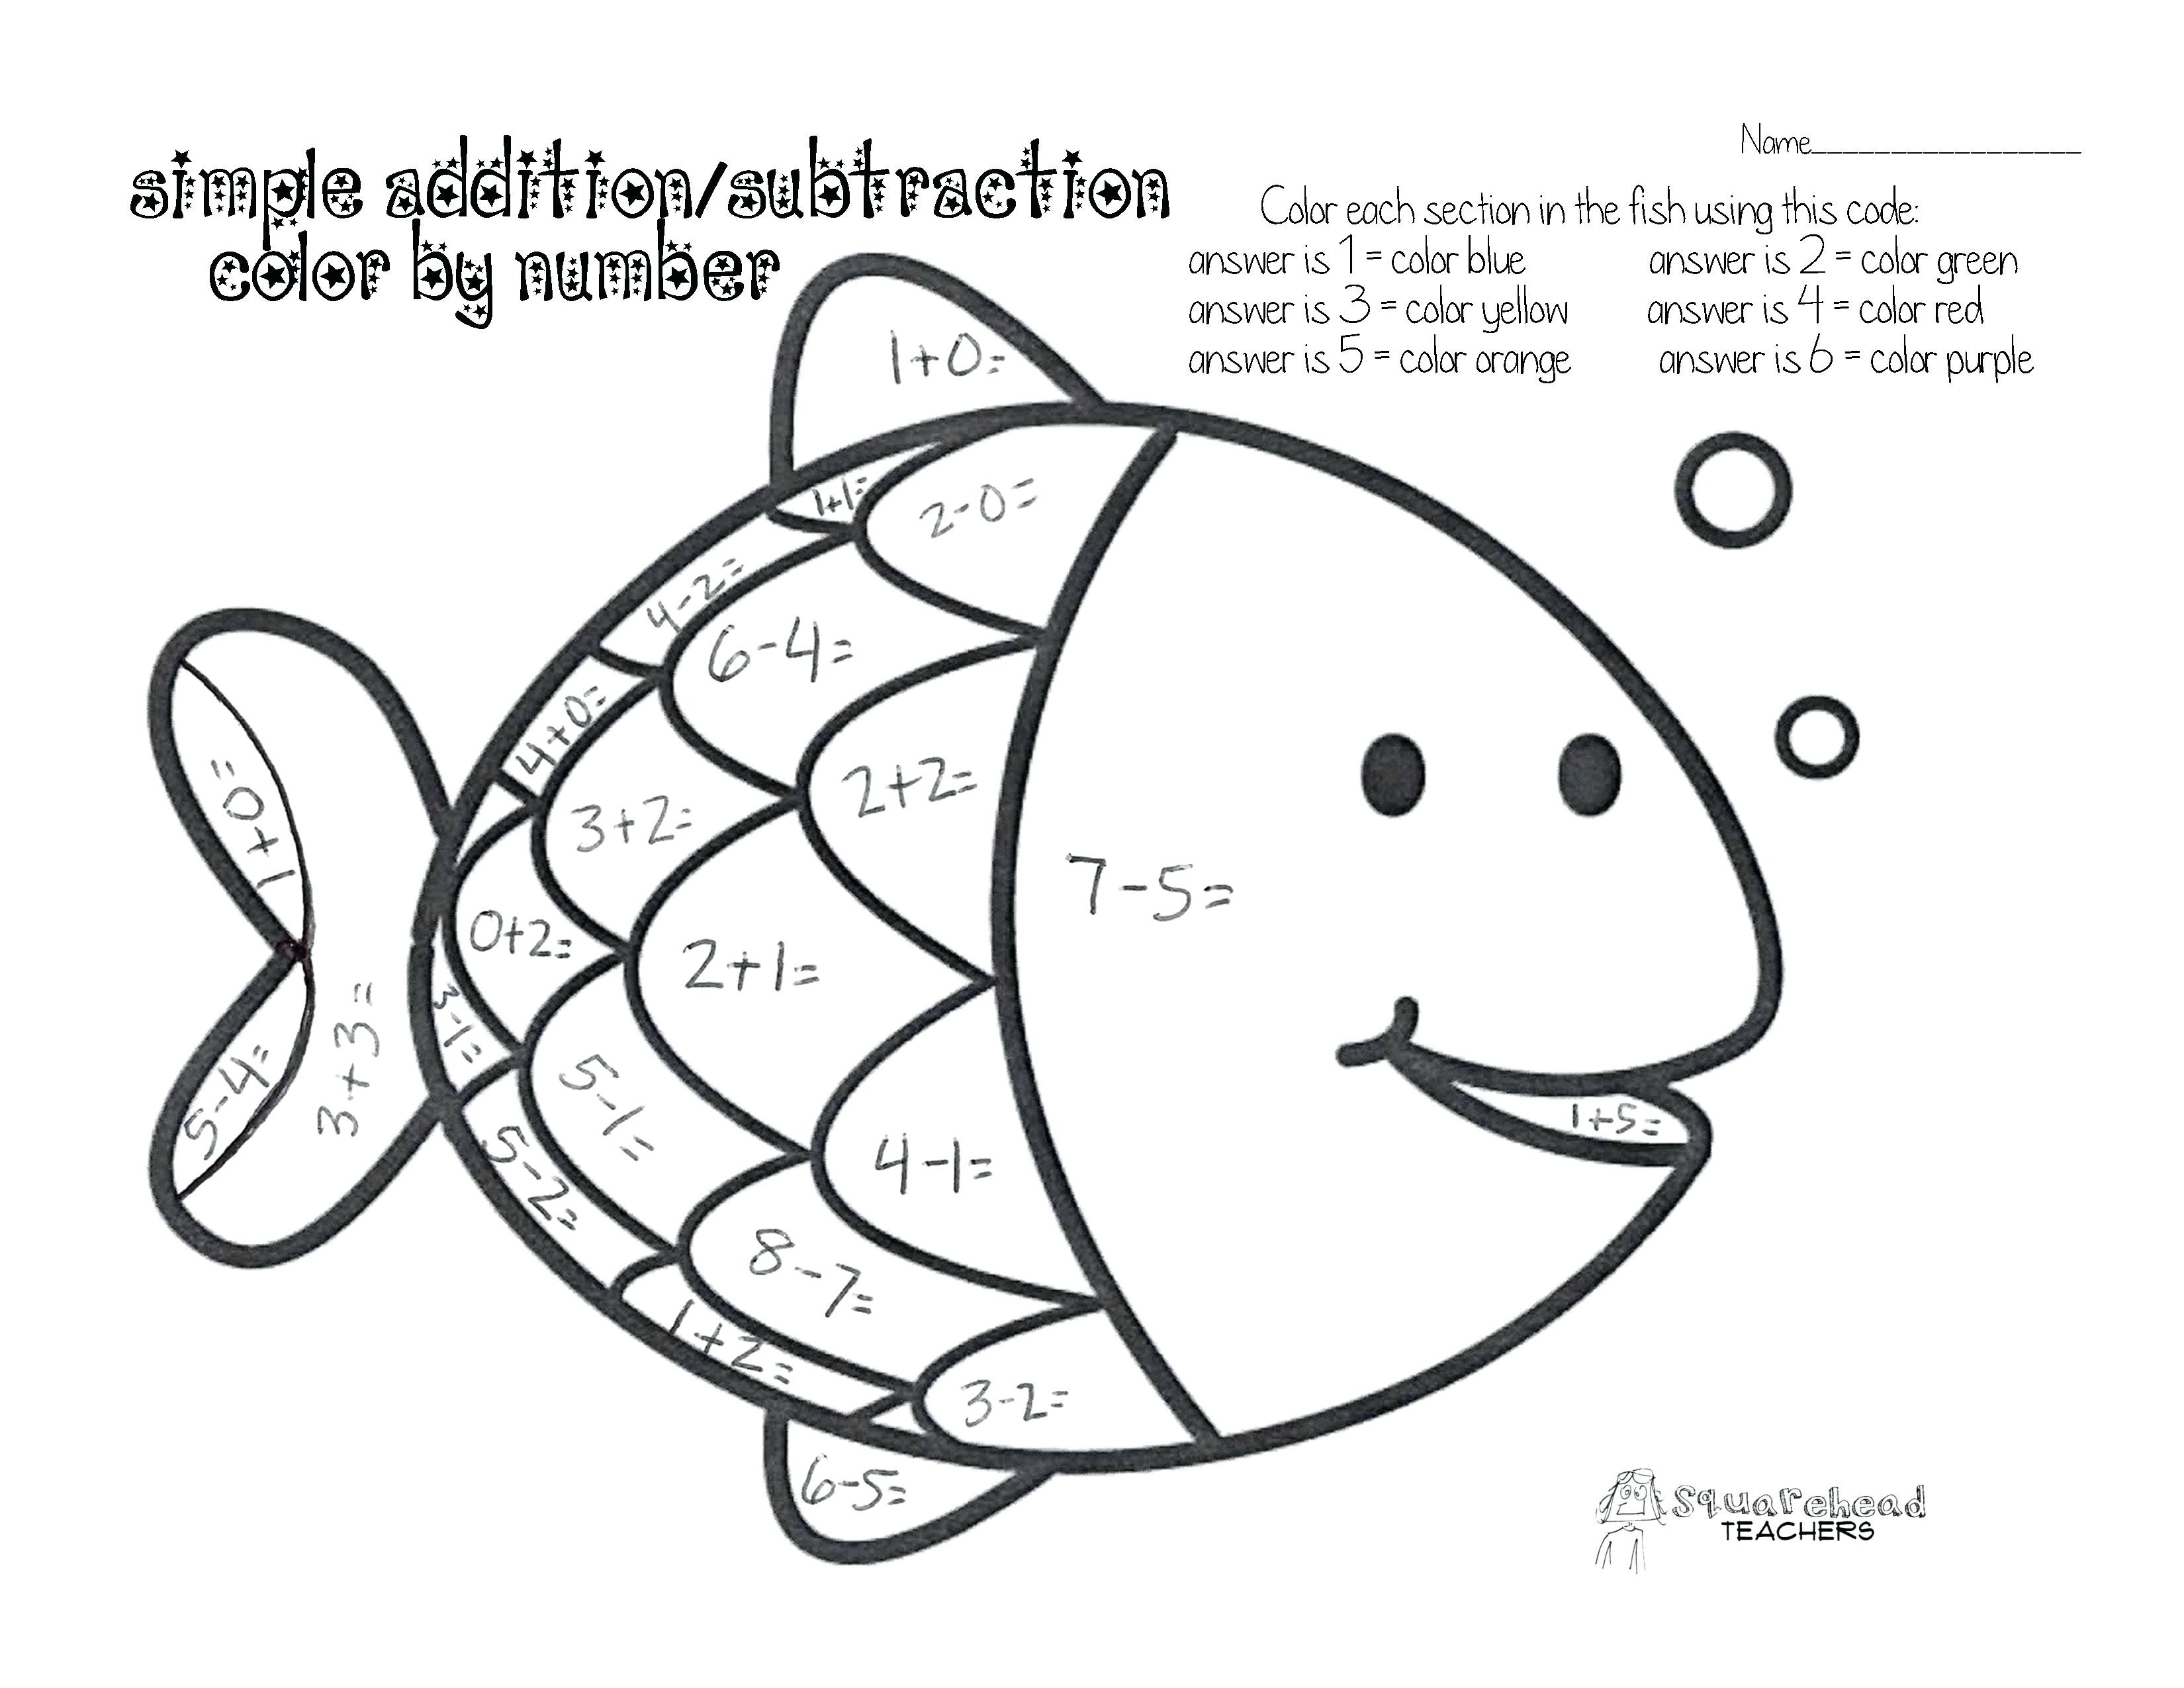 Cool Math Coloring Pages At GetColorings Free Printable Colorings Pages To Print And Color